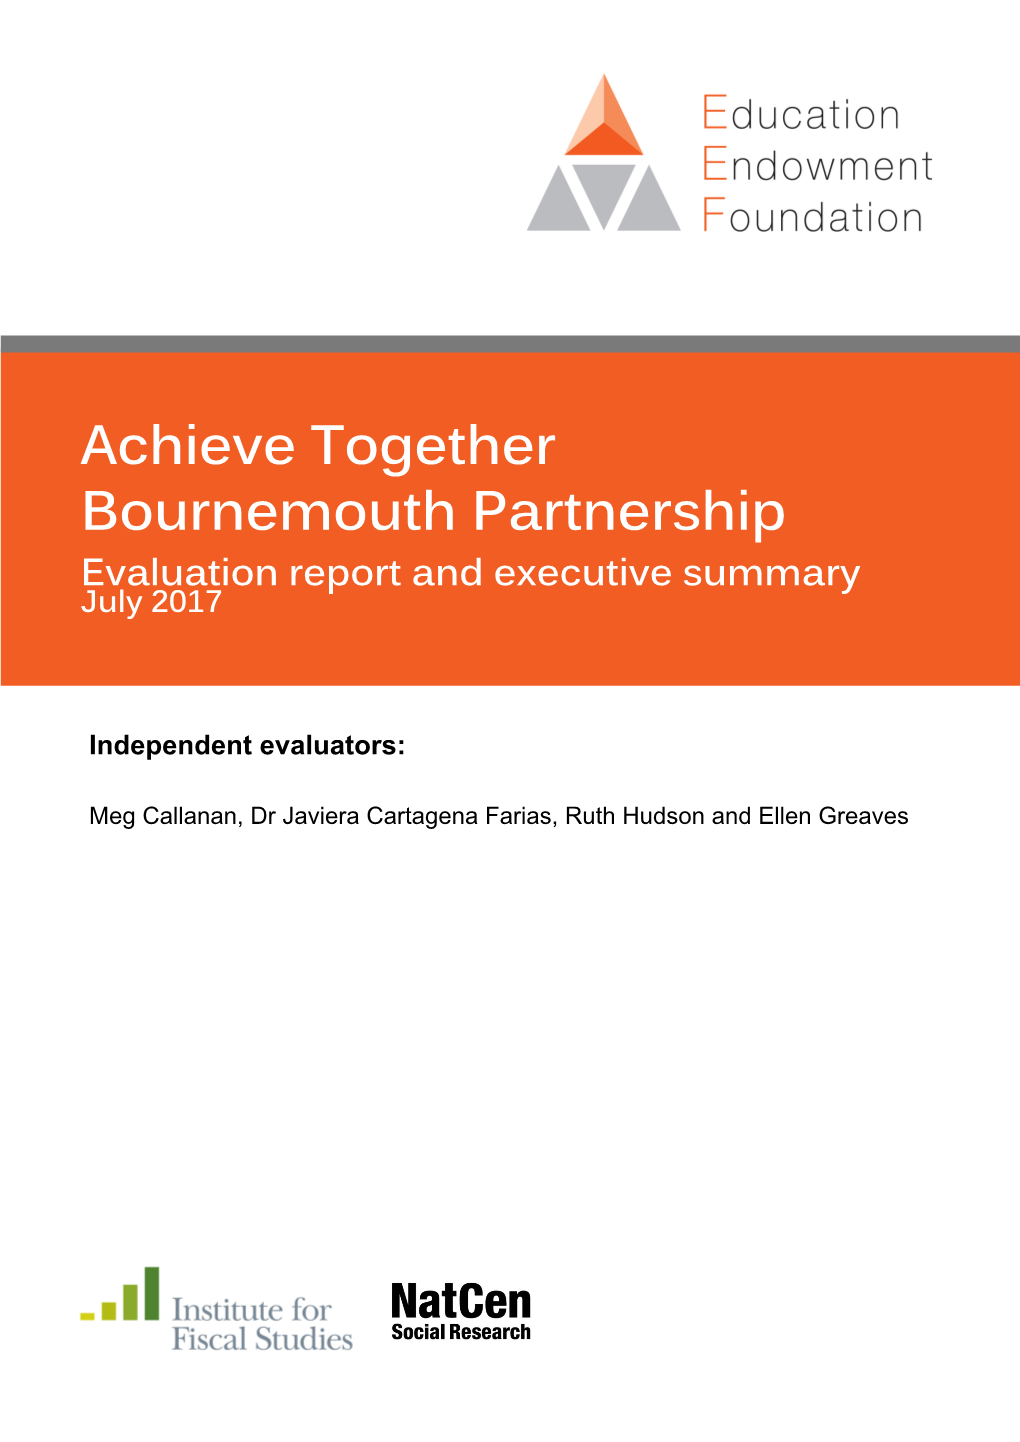 Achieve Together Bournemouth Partnership Evaluation Report and Executive Summary July 2017